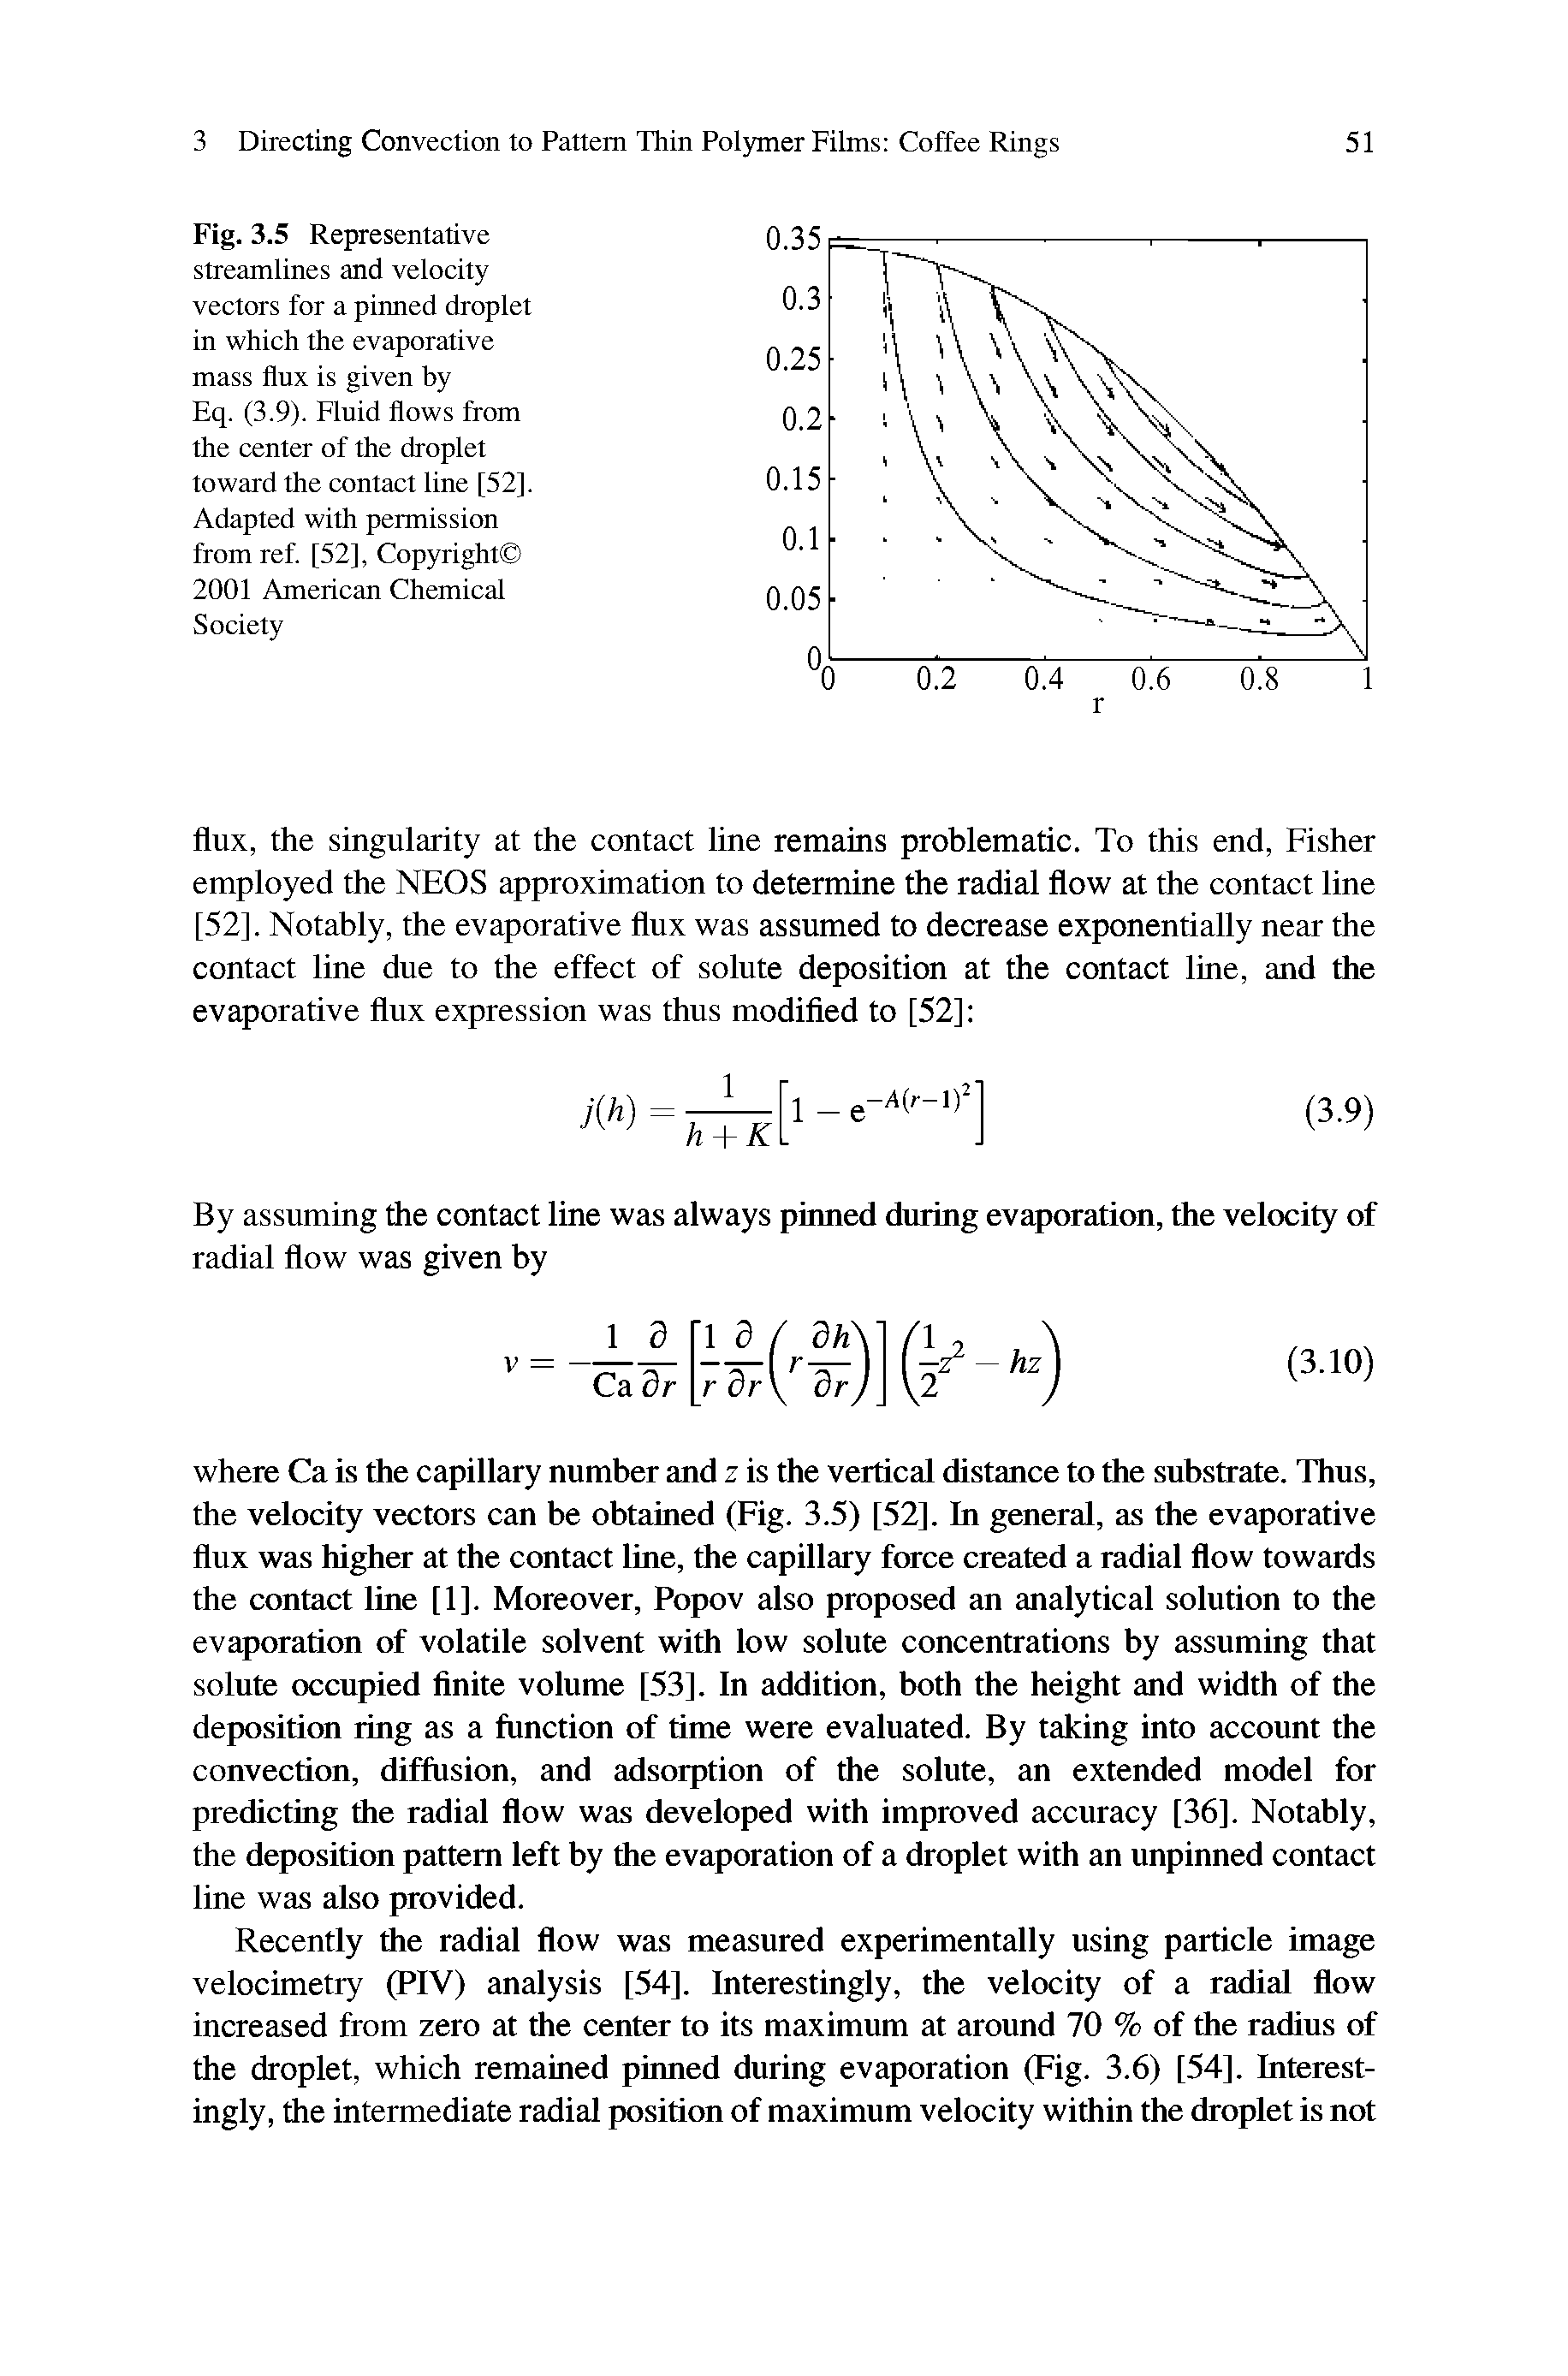 Fig. 3.5 Representative streamlines and velocity vectors for a pinned droplet in which the evaporative mass flux is given by Eq. (3.9). Fluid flows from the center of the droplet toward the contact line [52]. Adapted with permission from ref [52], Copyright 2001 American Chemical Society...